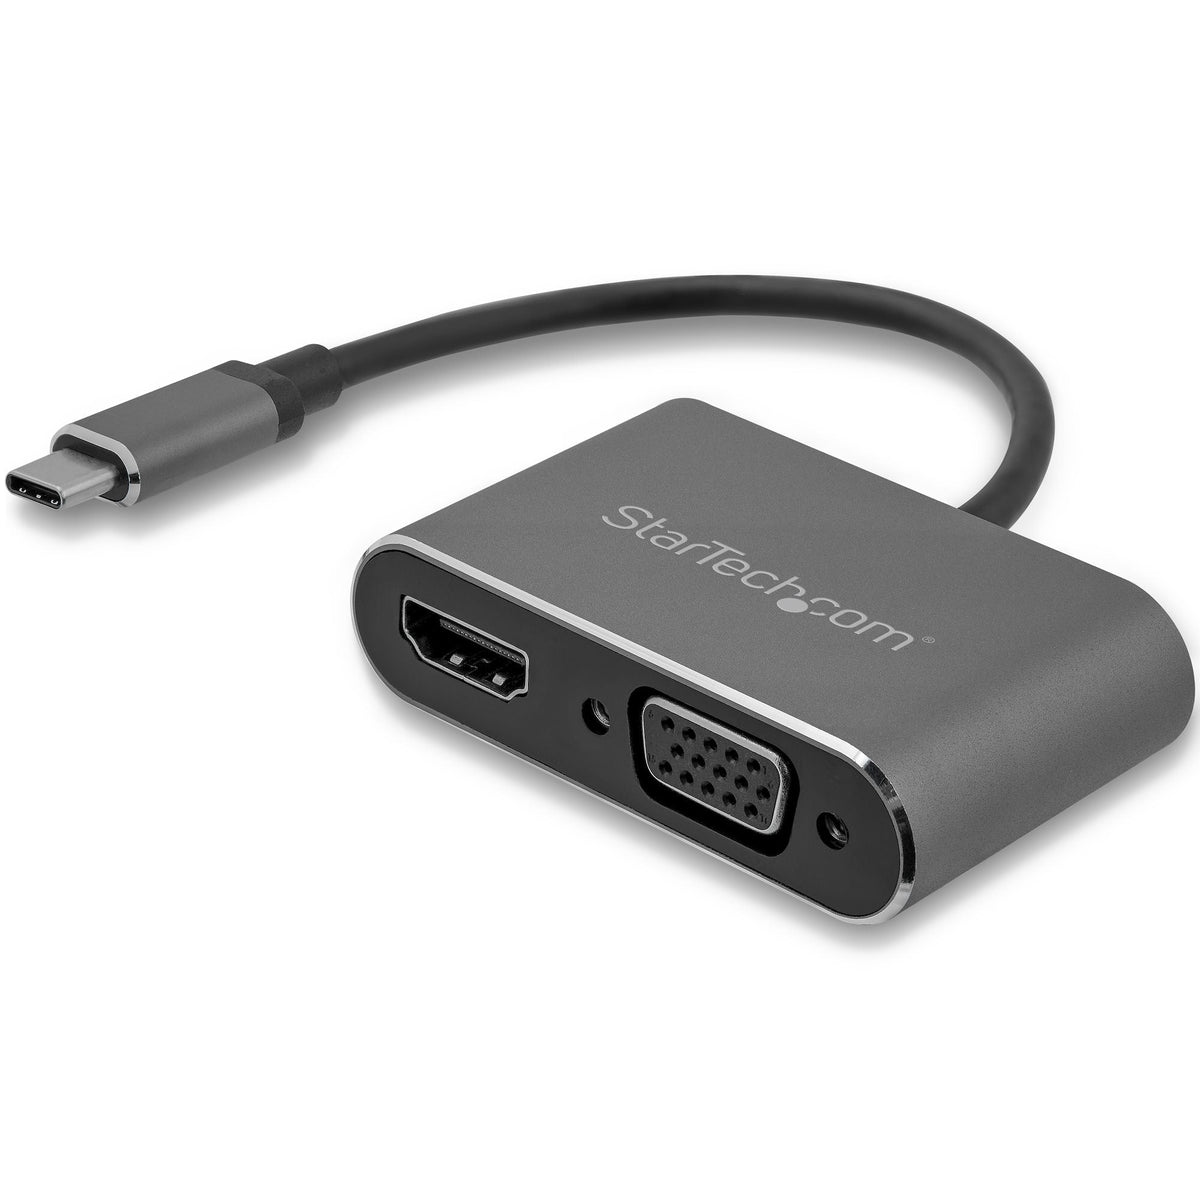 StarTech.com USB-C to VGA and HDMI Adapter - 2-in-1 - 4K 30Hz - Space Gray